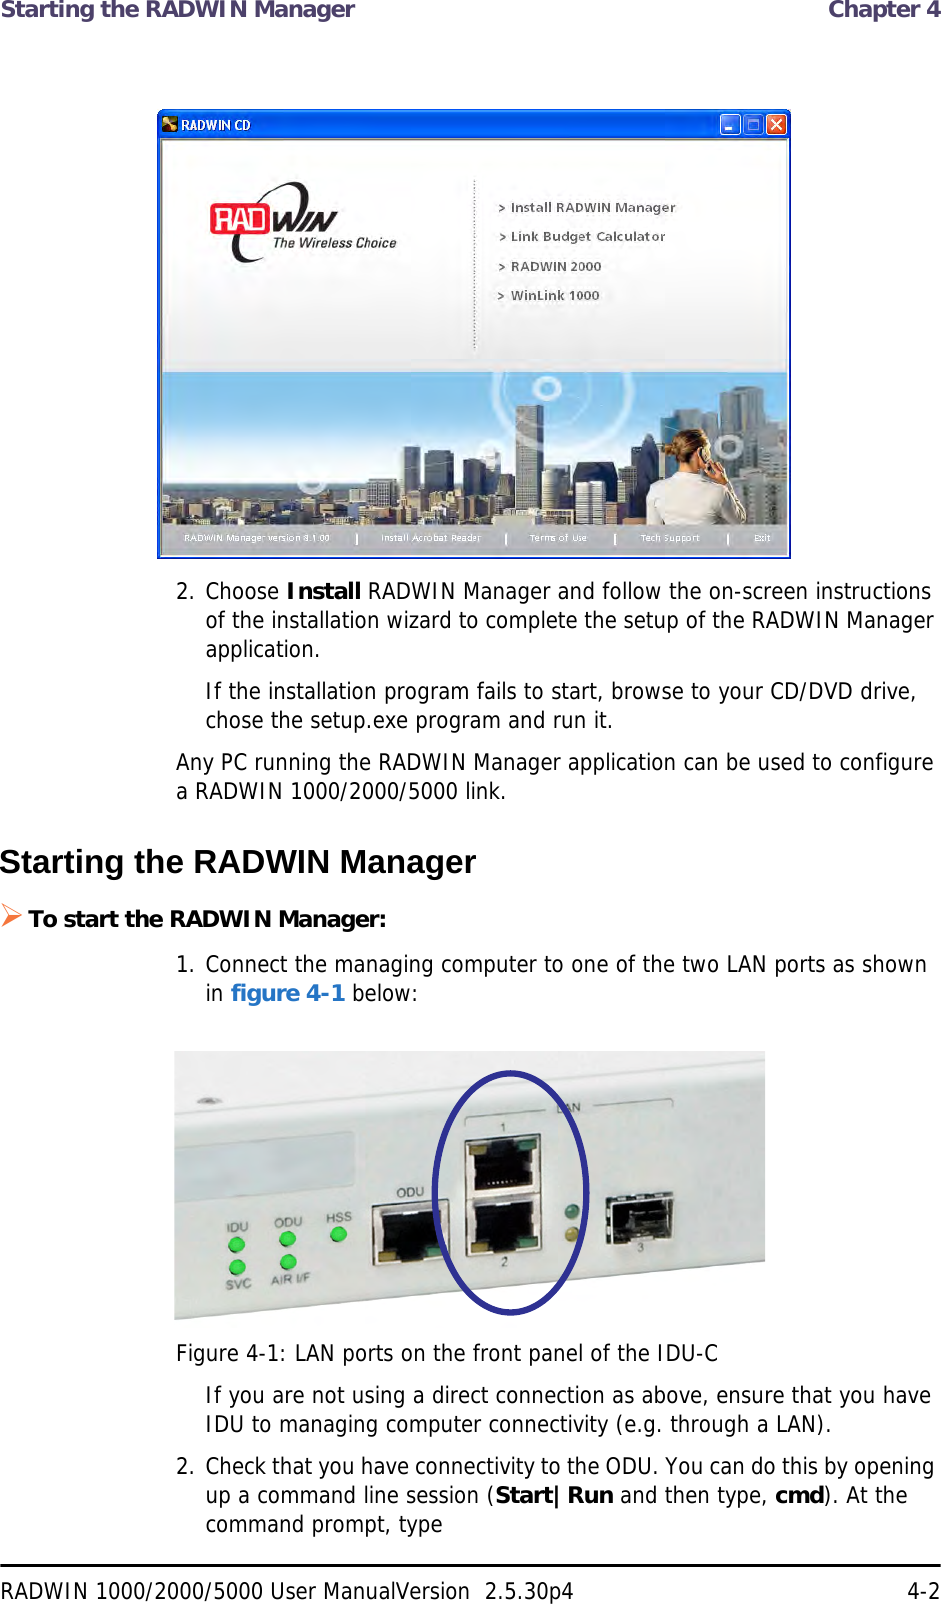 Starting the RADWIN Manager  Chapter 4RADWIN 1000/2000/5000 User ManualVersion  2.5.30p4 4-22. Choose Install RADWIN Manager and follow the on-screen instructions of the installation wizard to complete the setup of the RADWIN Manager application.If the installation program fails to start, browse to your CD/DVD drive, chose the setup.exe program and run it.Any PC running the RADWIN Manager application can be used to configure a RADWIN 1000/2000/5000 link.Starting the RADWIN Manager To start the RADWIN Manager:1. Connect the managing computer to one of the two LAN ports as shown in figure 4-1 below:Figure 4-1: LAN ports on the front panel of the IDU-CIf you are not using a direct connection as above, ensure that you have IDU to managing computer connectivity (e.g. through a LAN).2. Check that you have connectivity to the ODU. You can do this by opening up a command line session (Start|Run and then type, cmd). At the command prompt, type